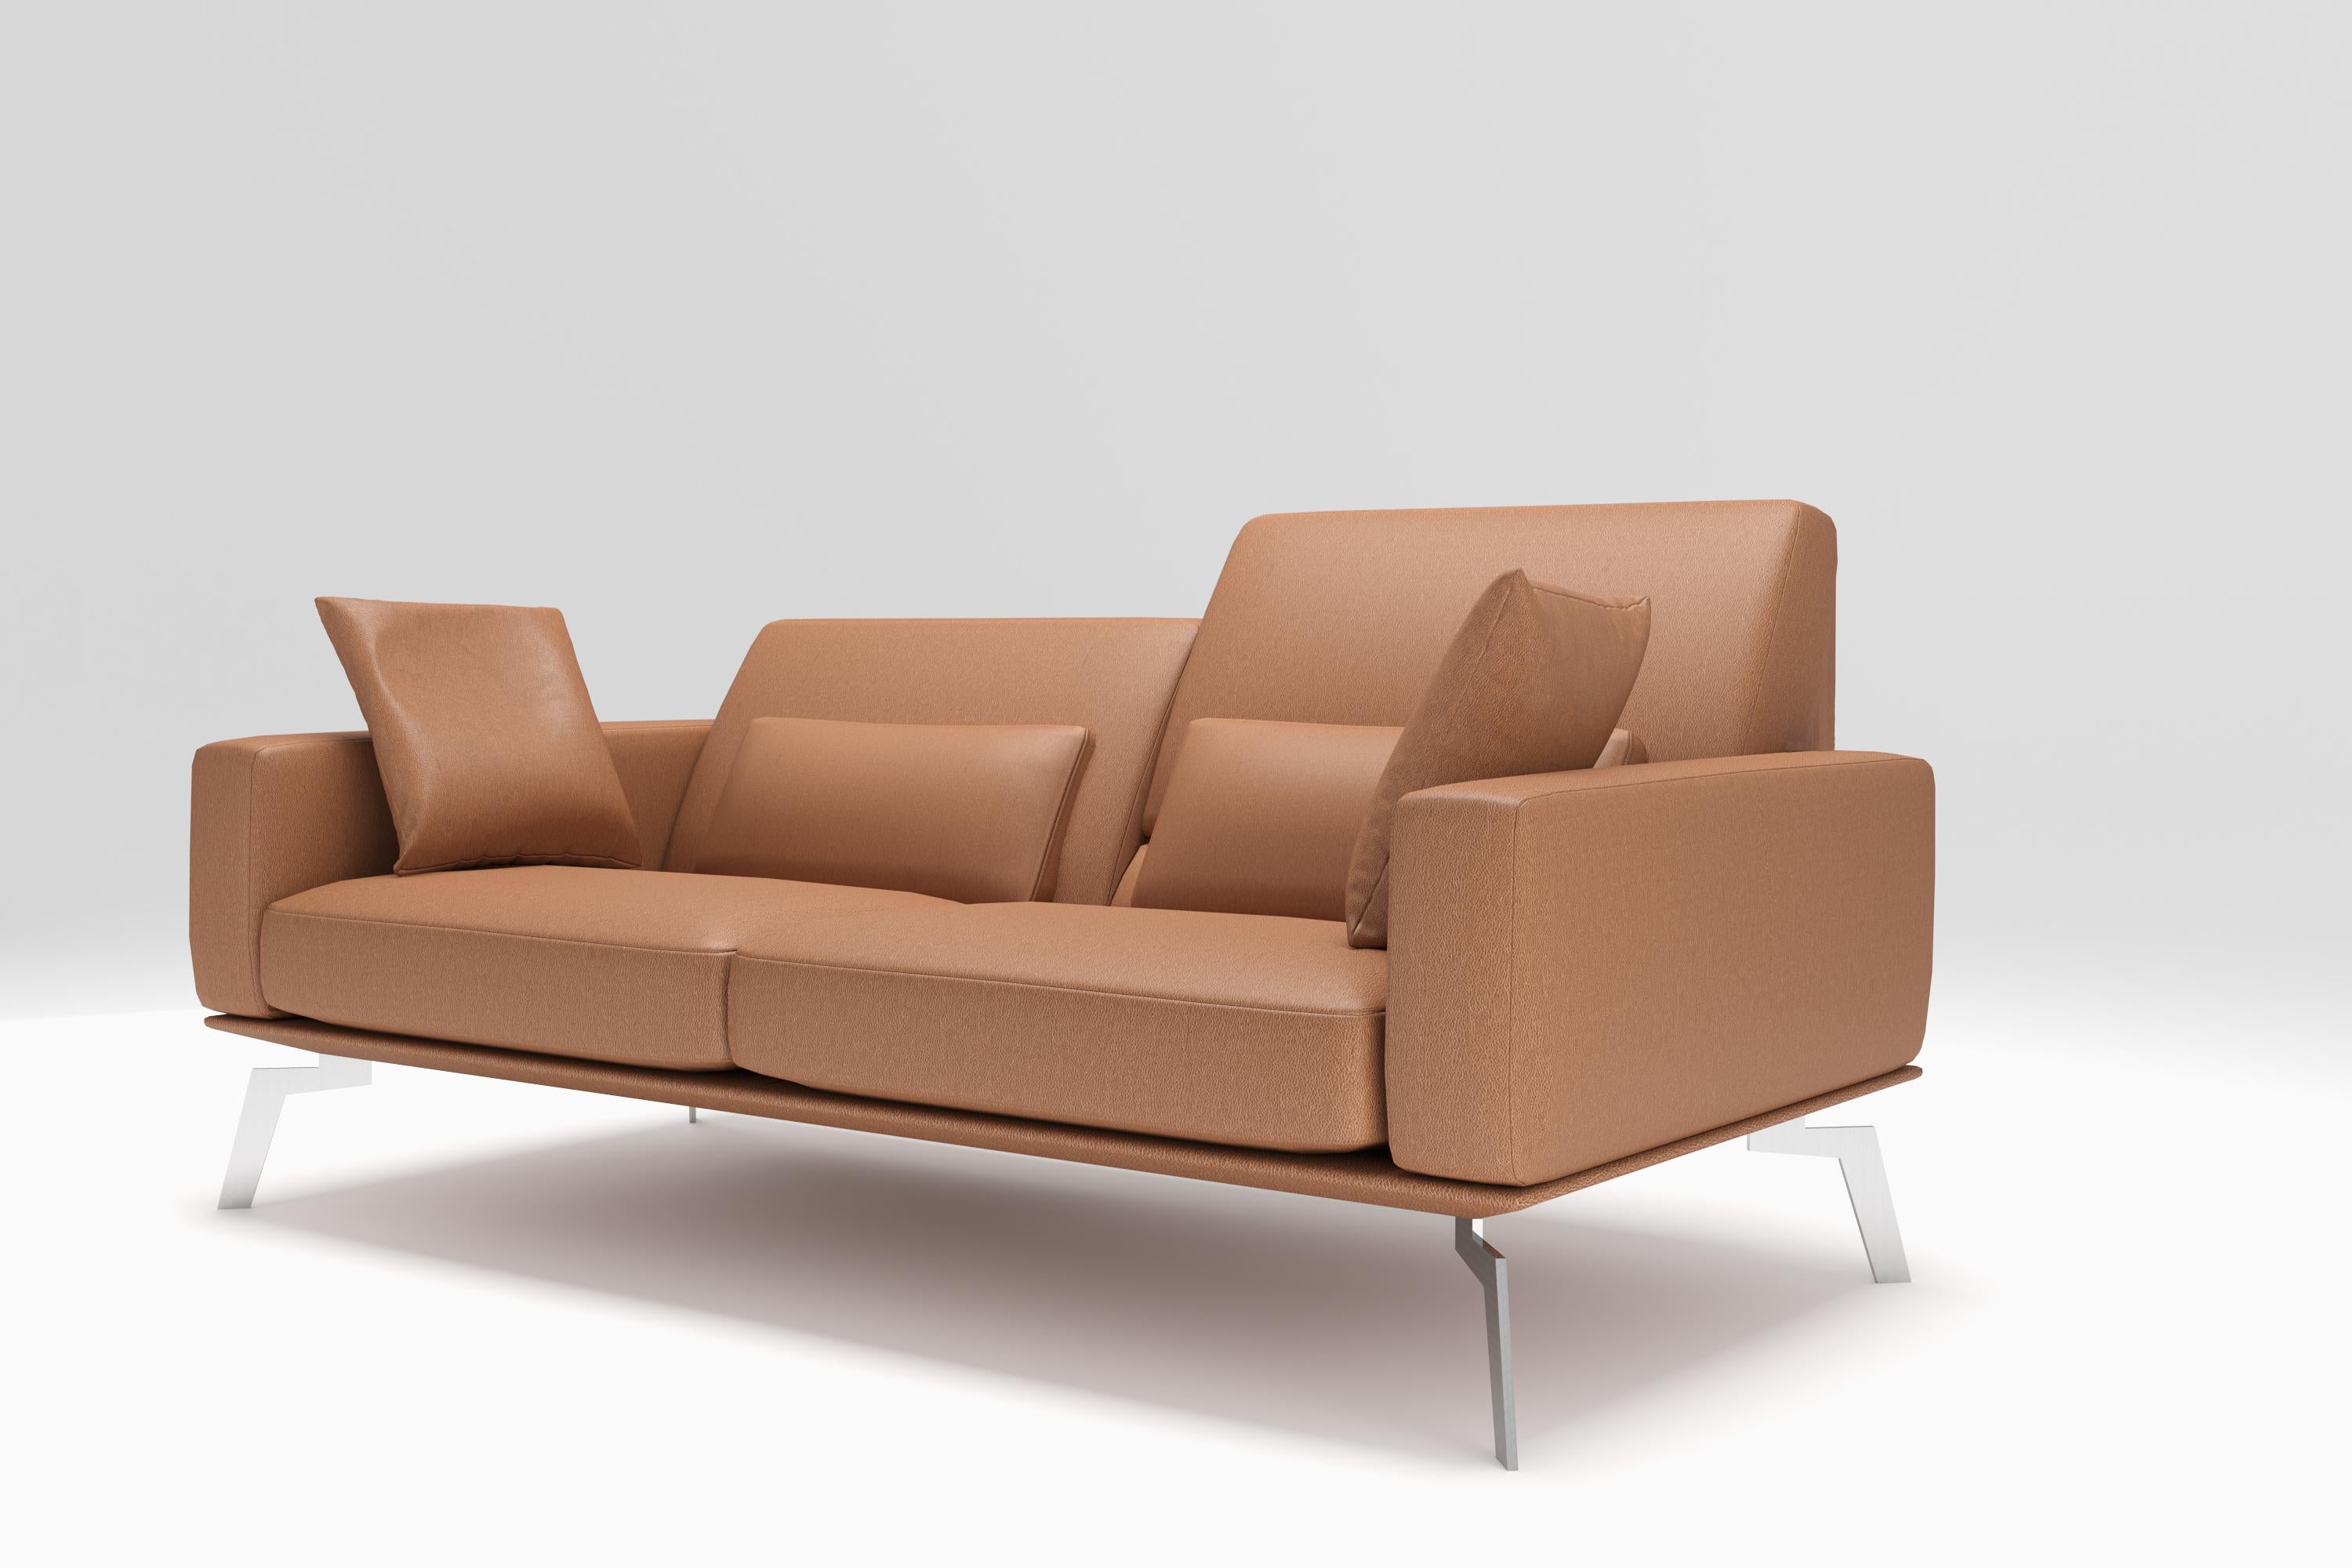 A floating island of tranquility with its slender form, the elegant DS-87 sofa model seems to float in the room, where it seamlessly fits into any modern environment – a piece of upholstered furniture at peace with itself, for the urban contemporary